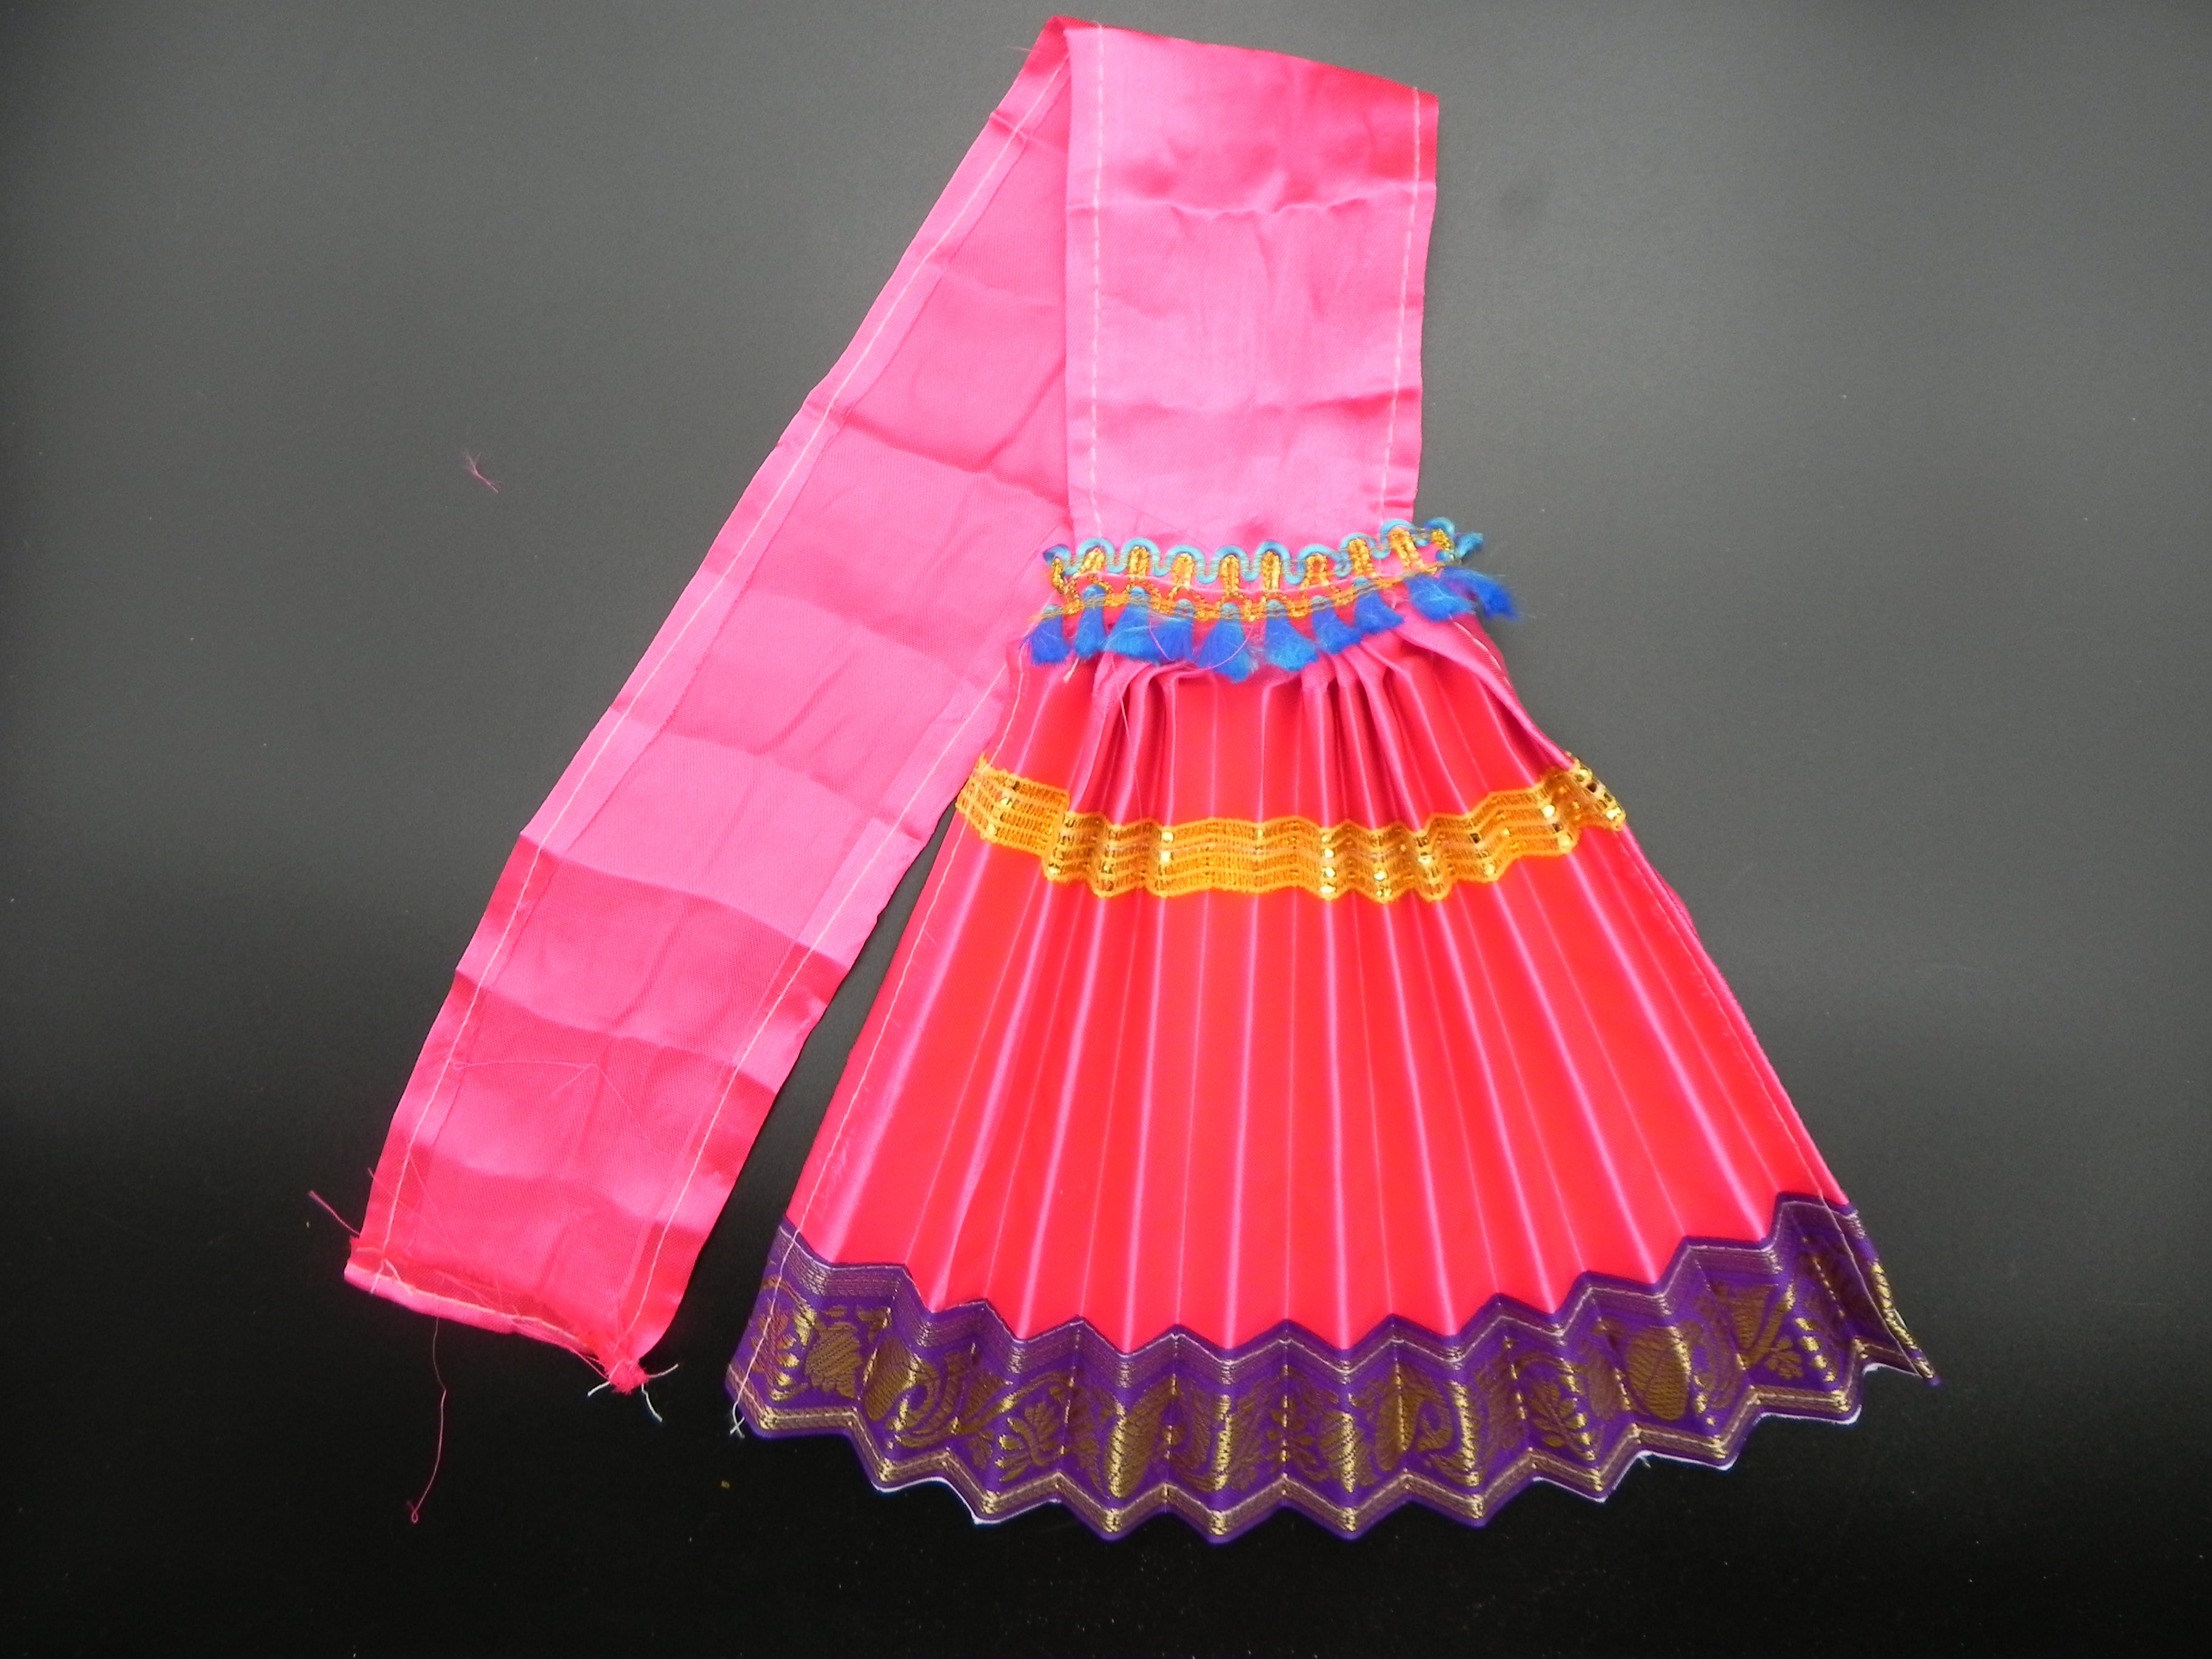 Sudhir Bhai Saree Wala - 𝐒𝐮𝐝𝐡𝐢𝐫 𝐁𝐡𝐚𝐢 𝐒𝐚𝐫𝐞𝐞 𝐖𝐚𝐥𝐚 ×  𝐏𝐚𝐫𝐮𝐥 𝐆𝐚𝐫𝐠 Featured here is a beautiful multipanelled lehenga skirt  based on pure raw silk. The outfit is rendered using kasab, marori,